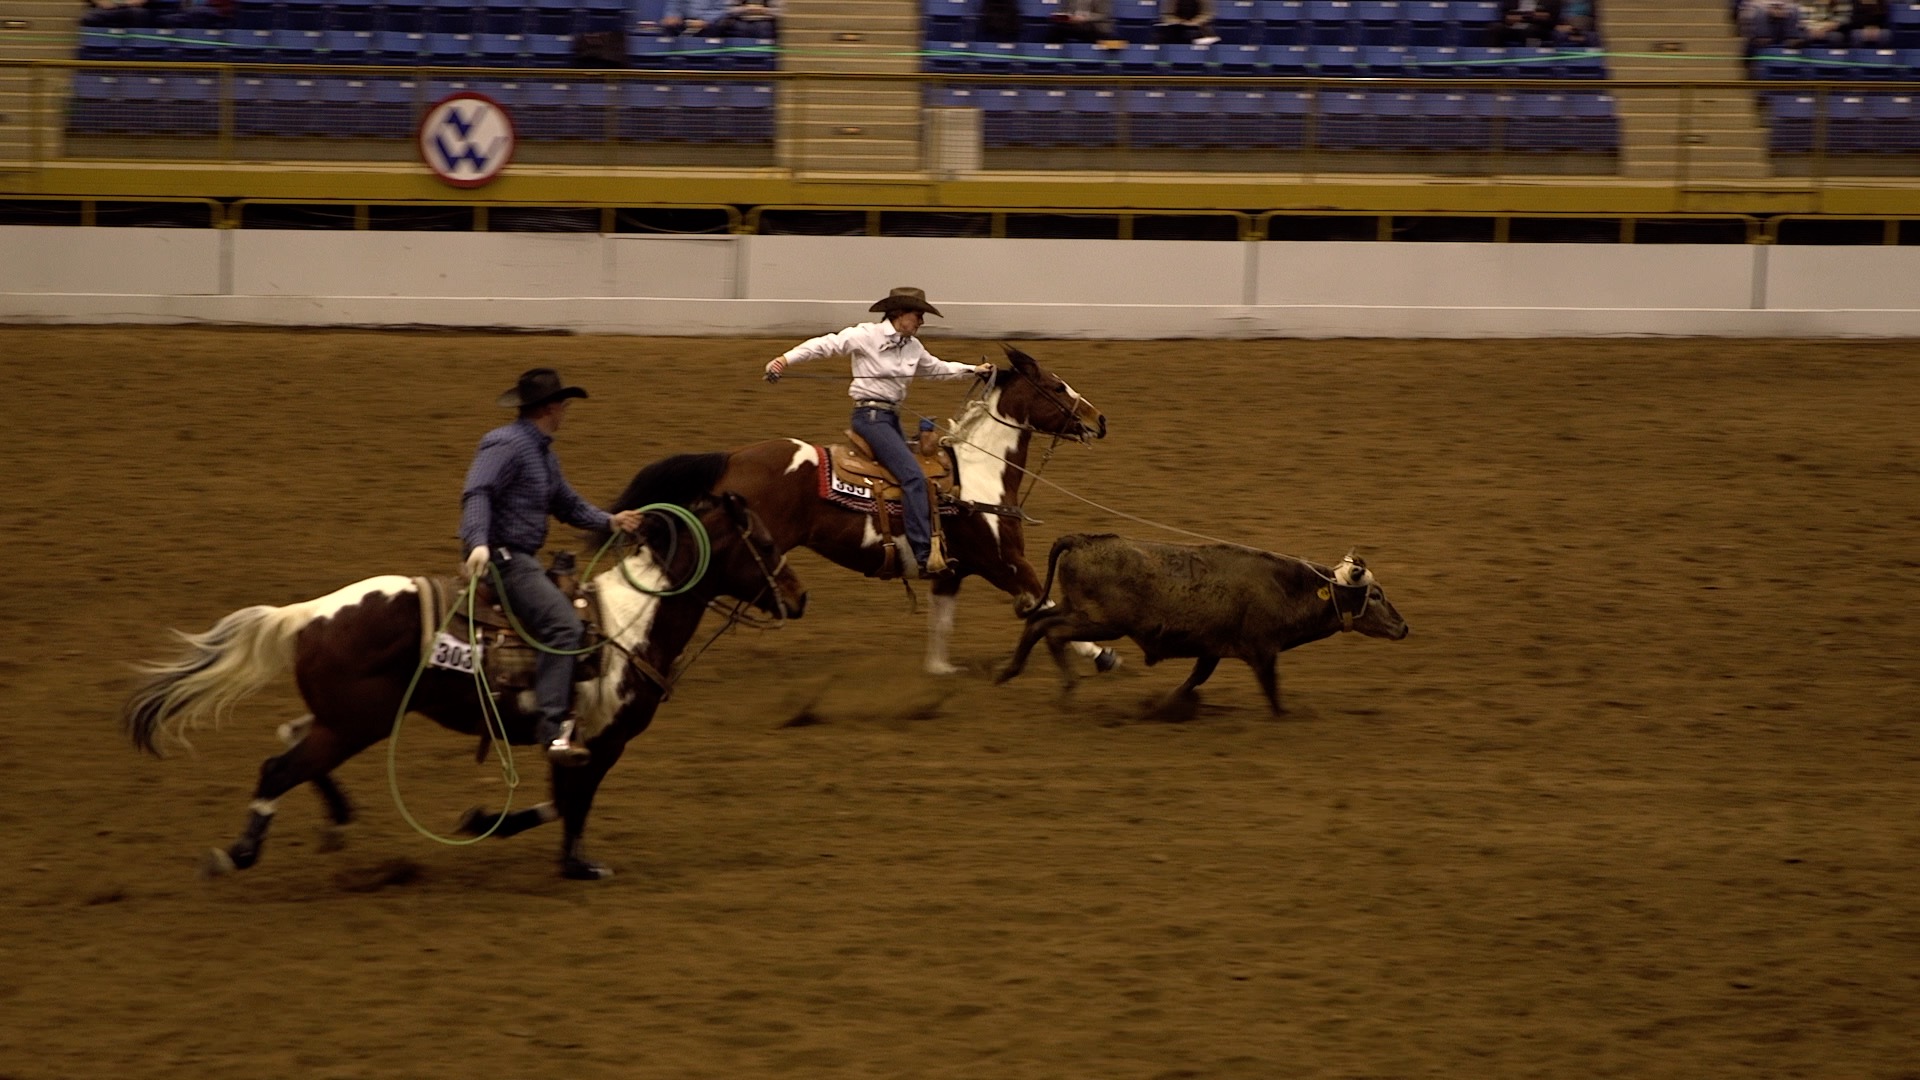 Air Force veteran grounded by roping at National Western Stock Show